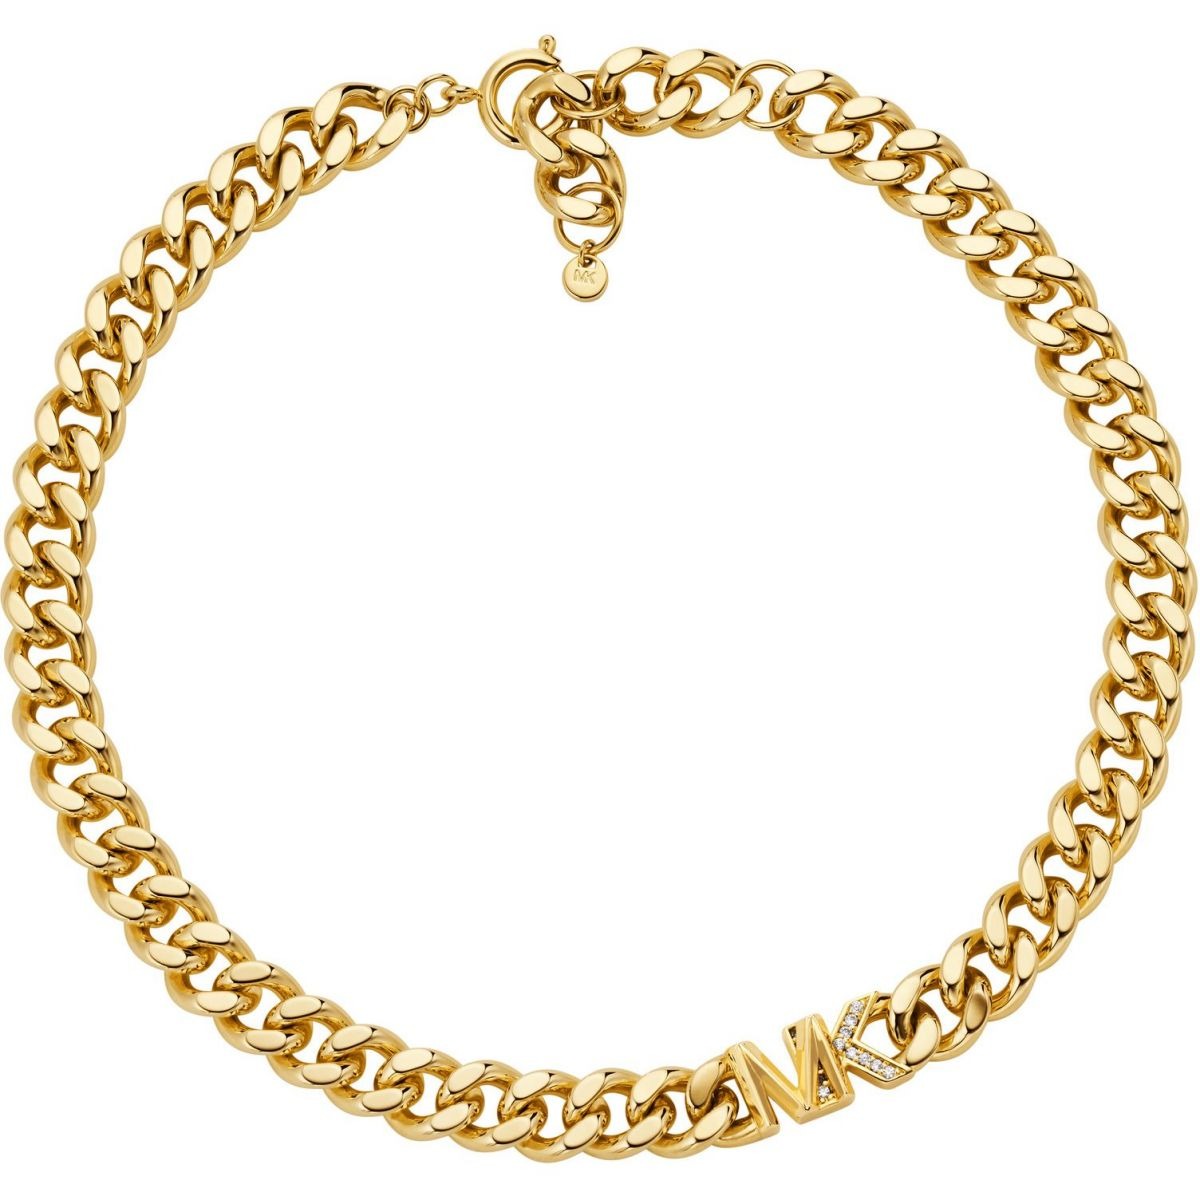 Woman Necklace in Gold Watch Shop - Michael Kors GOOFASH